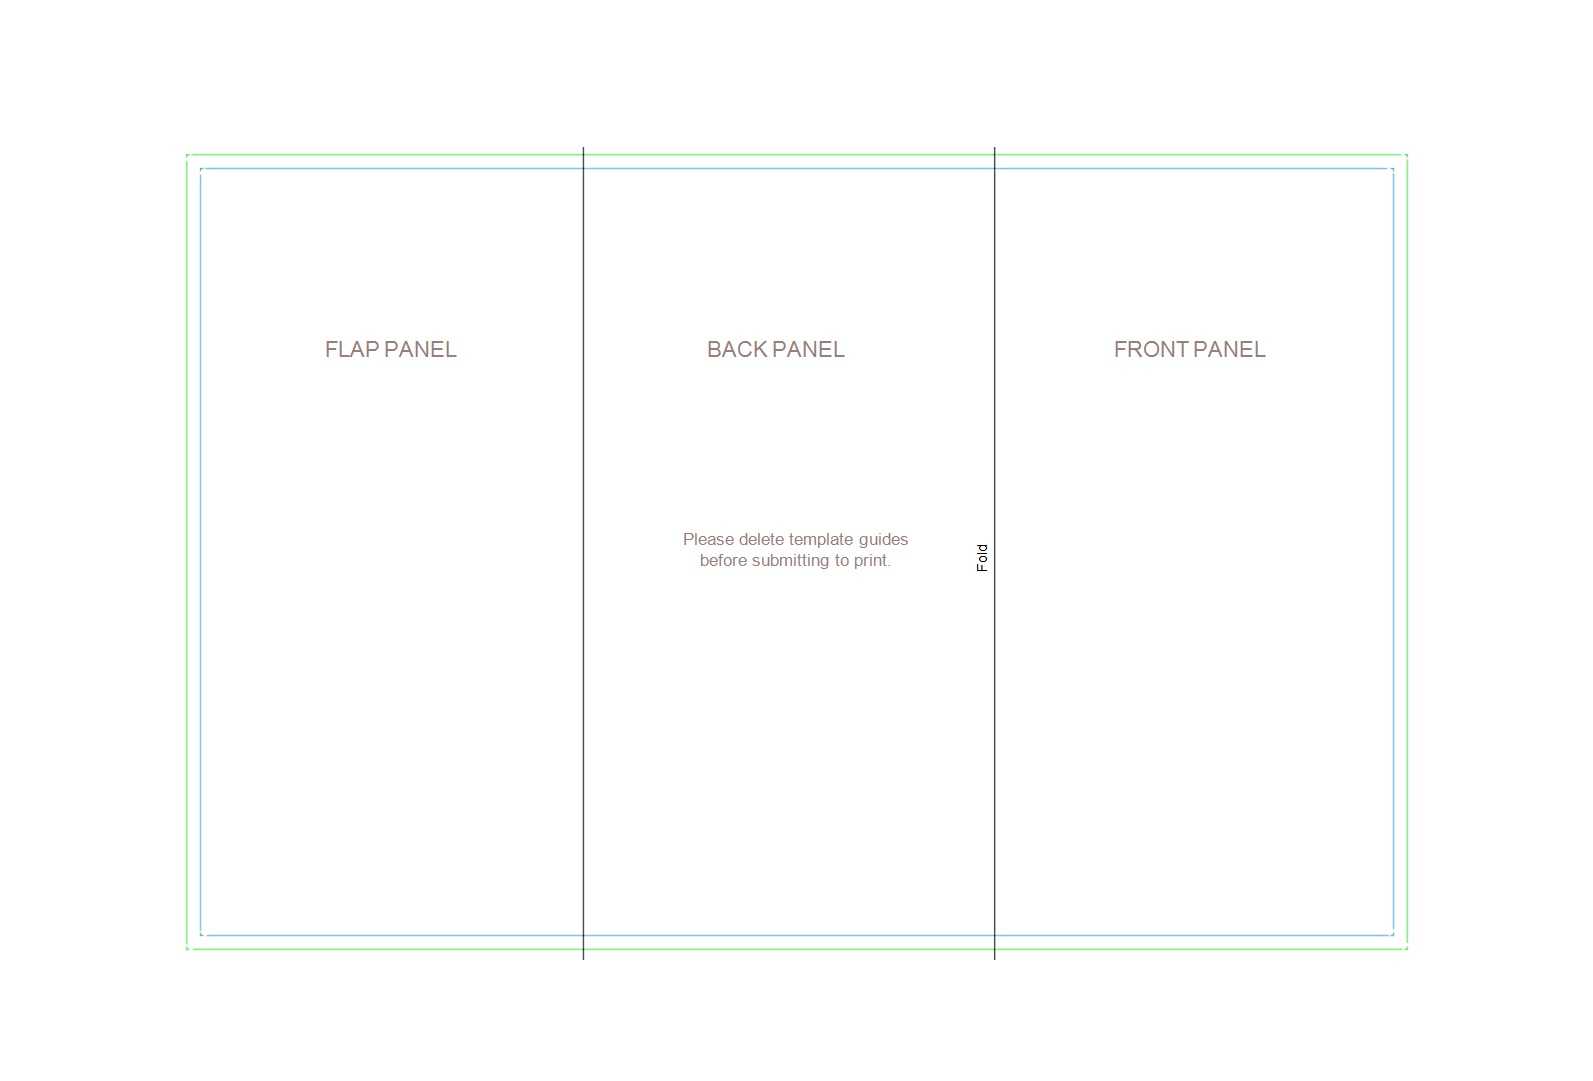 50 Free Pamphlet Templates [Word / Google Docs] ᐅ Template Lab Within Google Docs Tri Fold Brochure Template